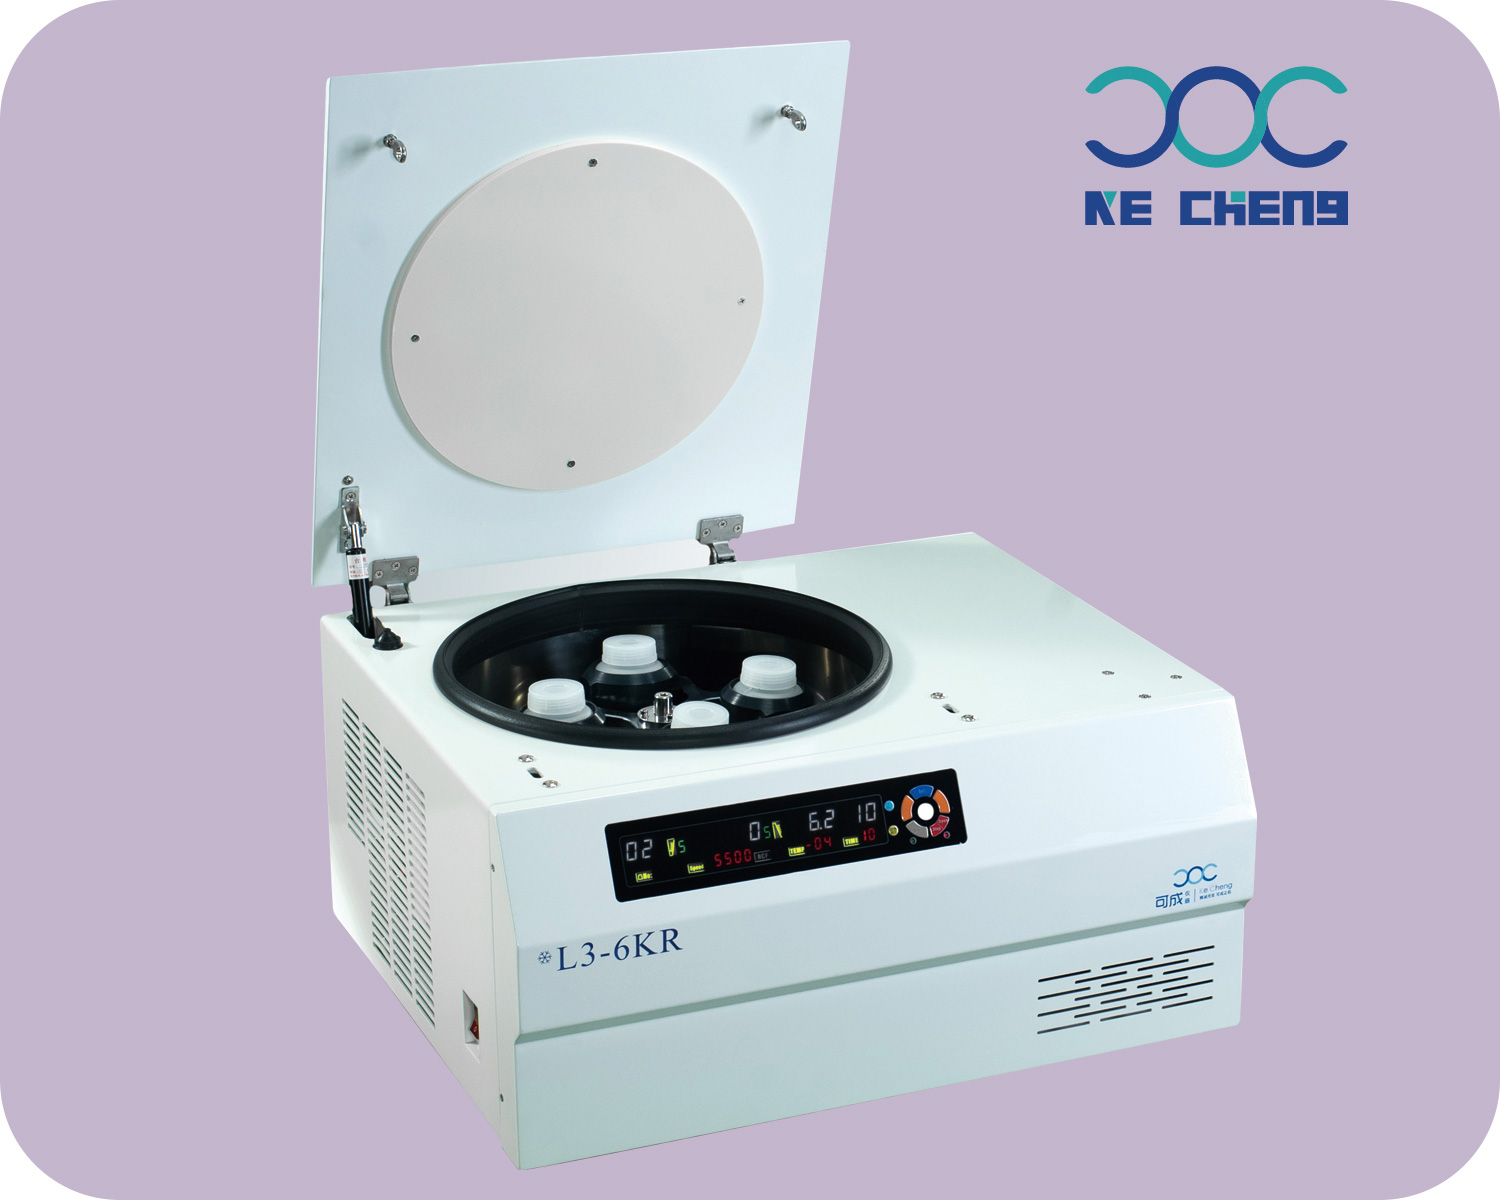 L3-6KR Table low speed refrigerated centrifuge